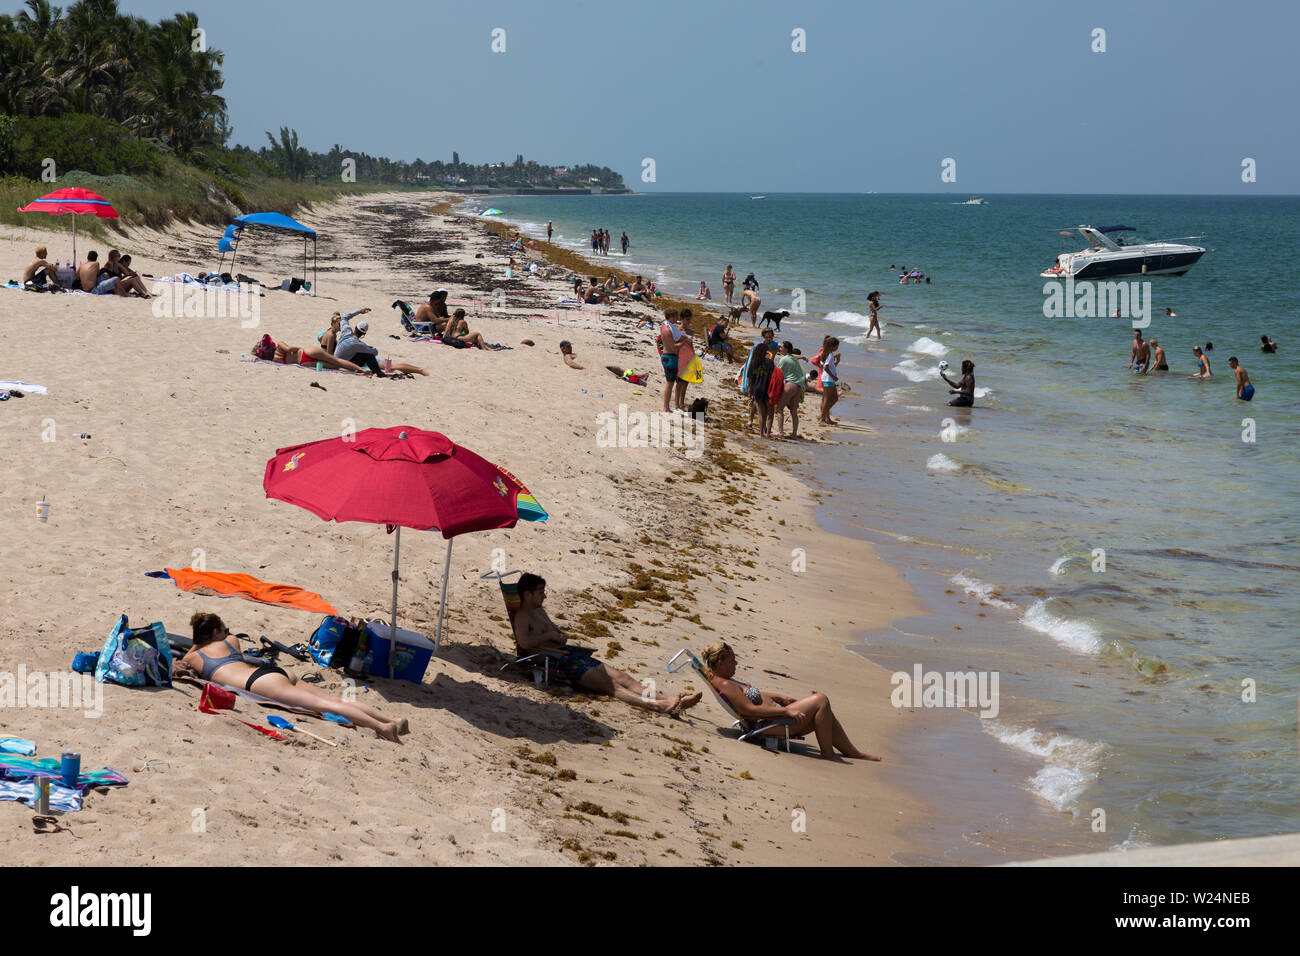 Sunbathers, beachcombers and swimmers enjoy the Atlantic Ocean and the South Florida sun on the beach in Manalapan, Florida, USA. Stock Photo